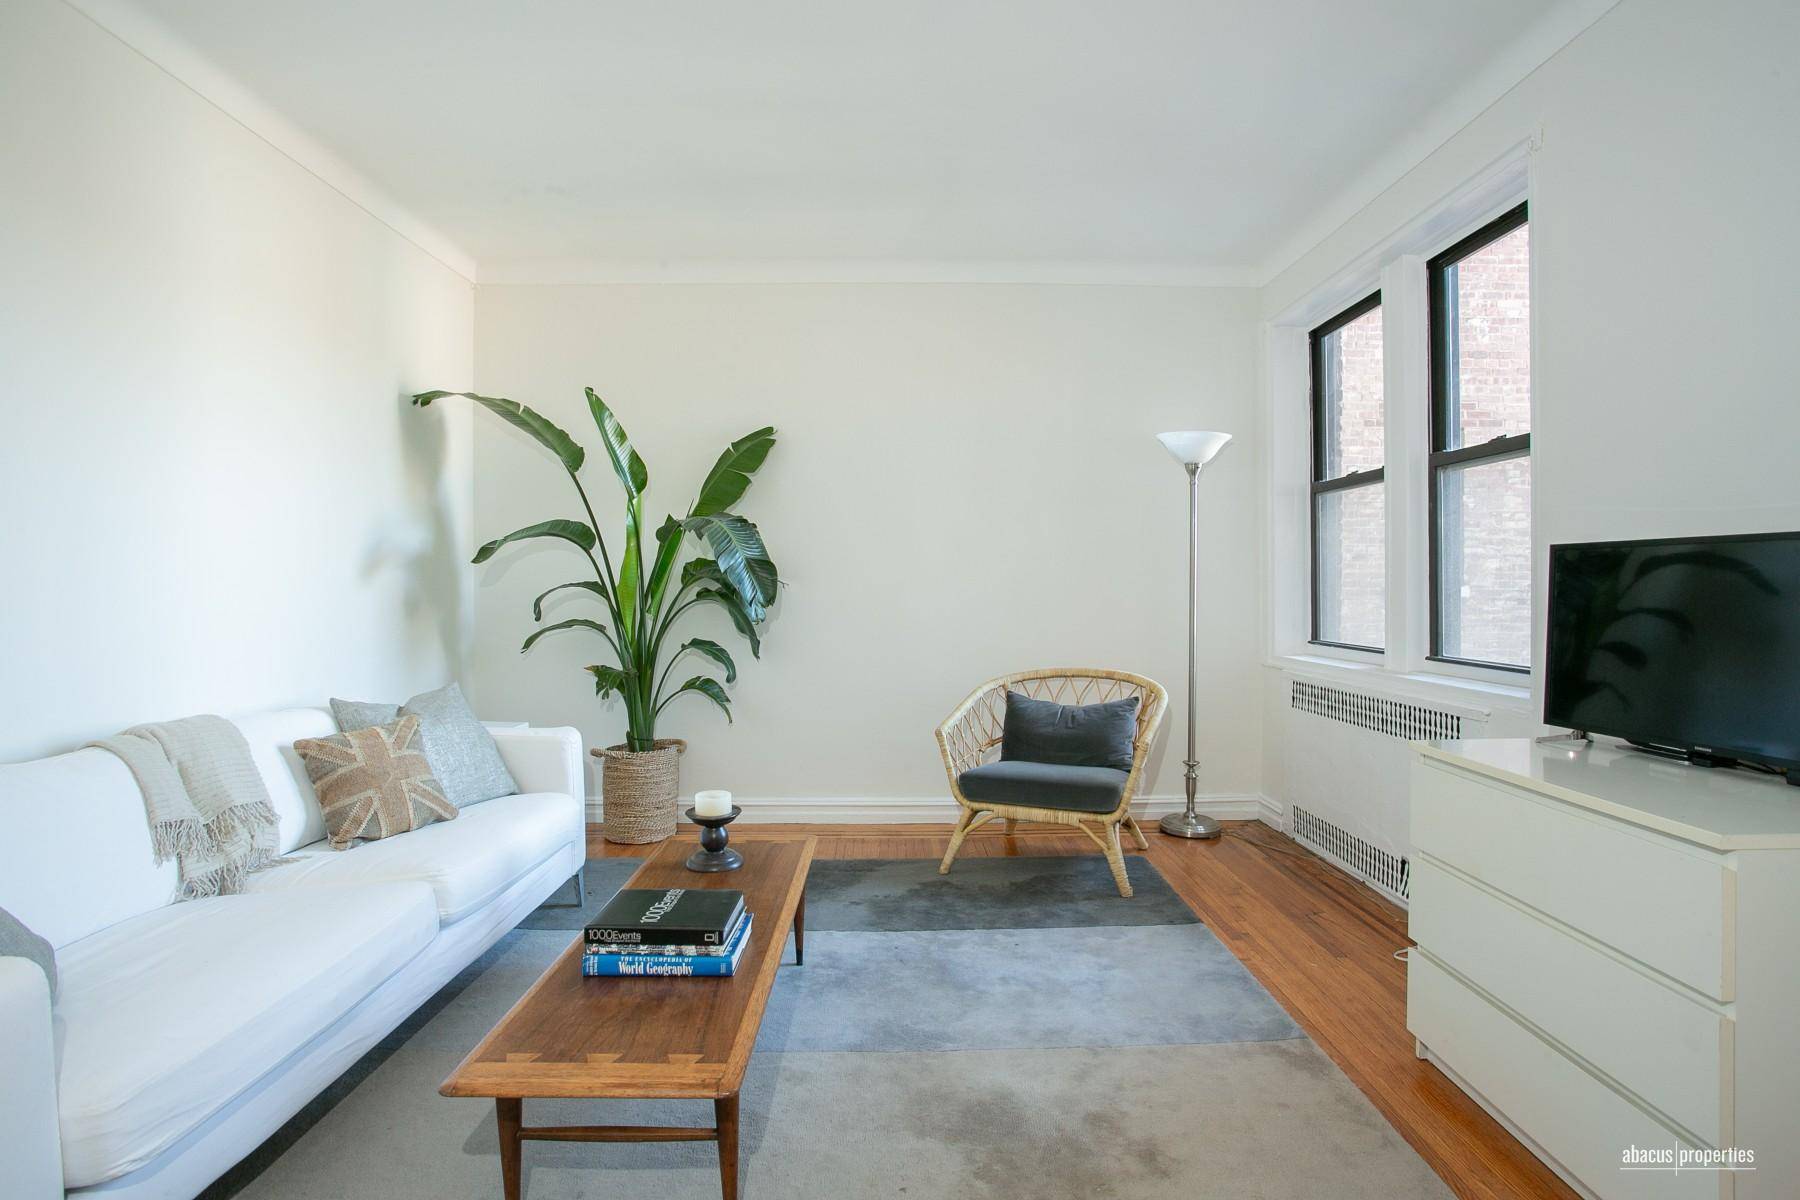 Welcome Home ! This lovely 1 bedroom is located in one of Kensingtons most coveted art deco pre war buildings on the 3rd floor of a 6 story elevator building.